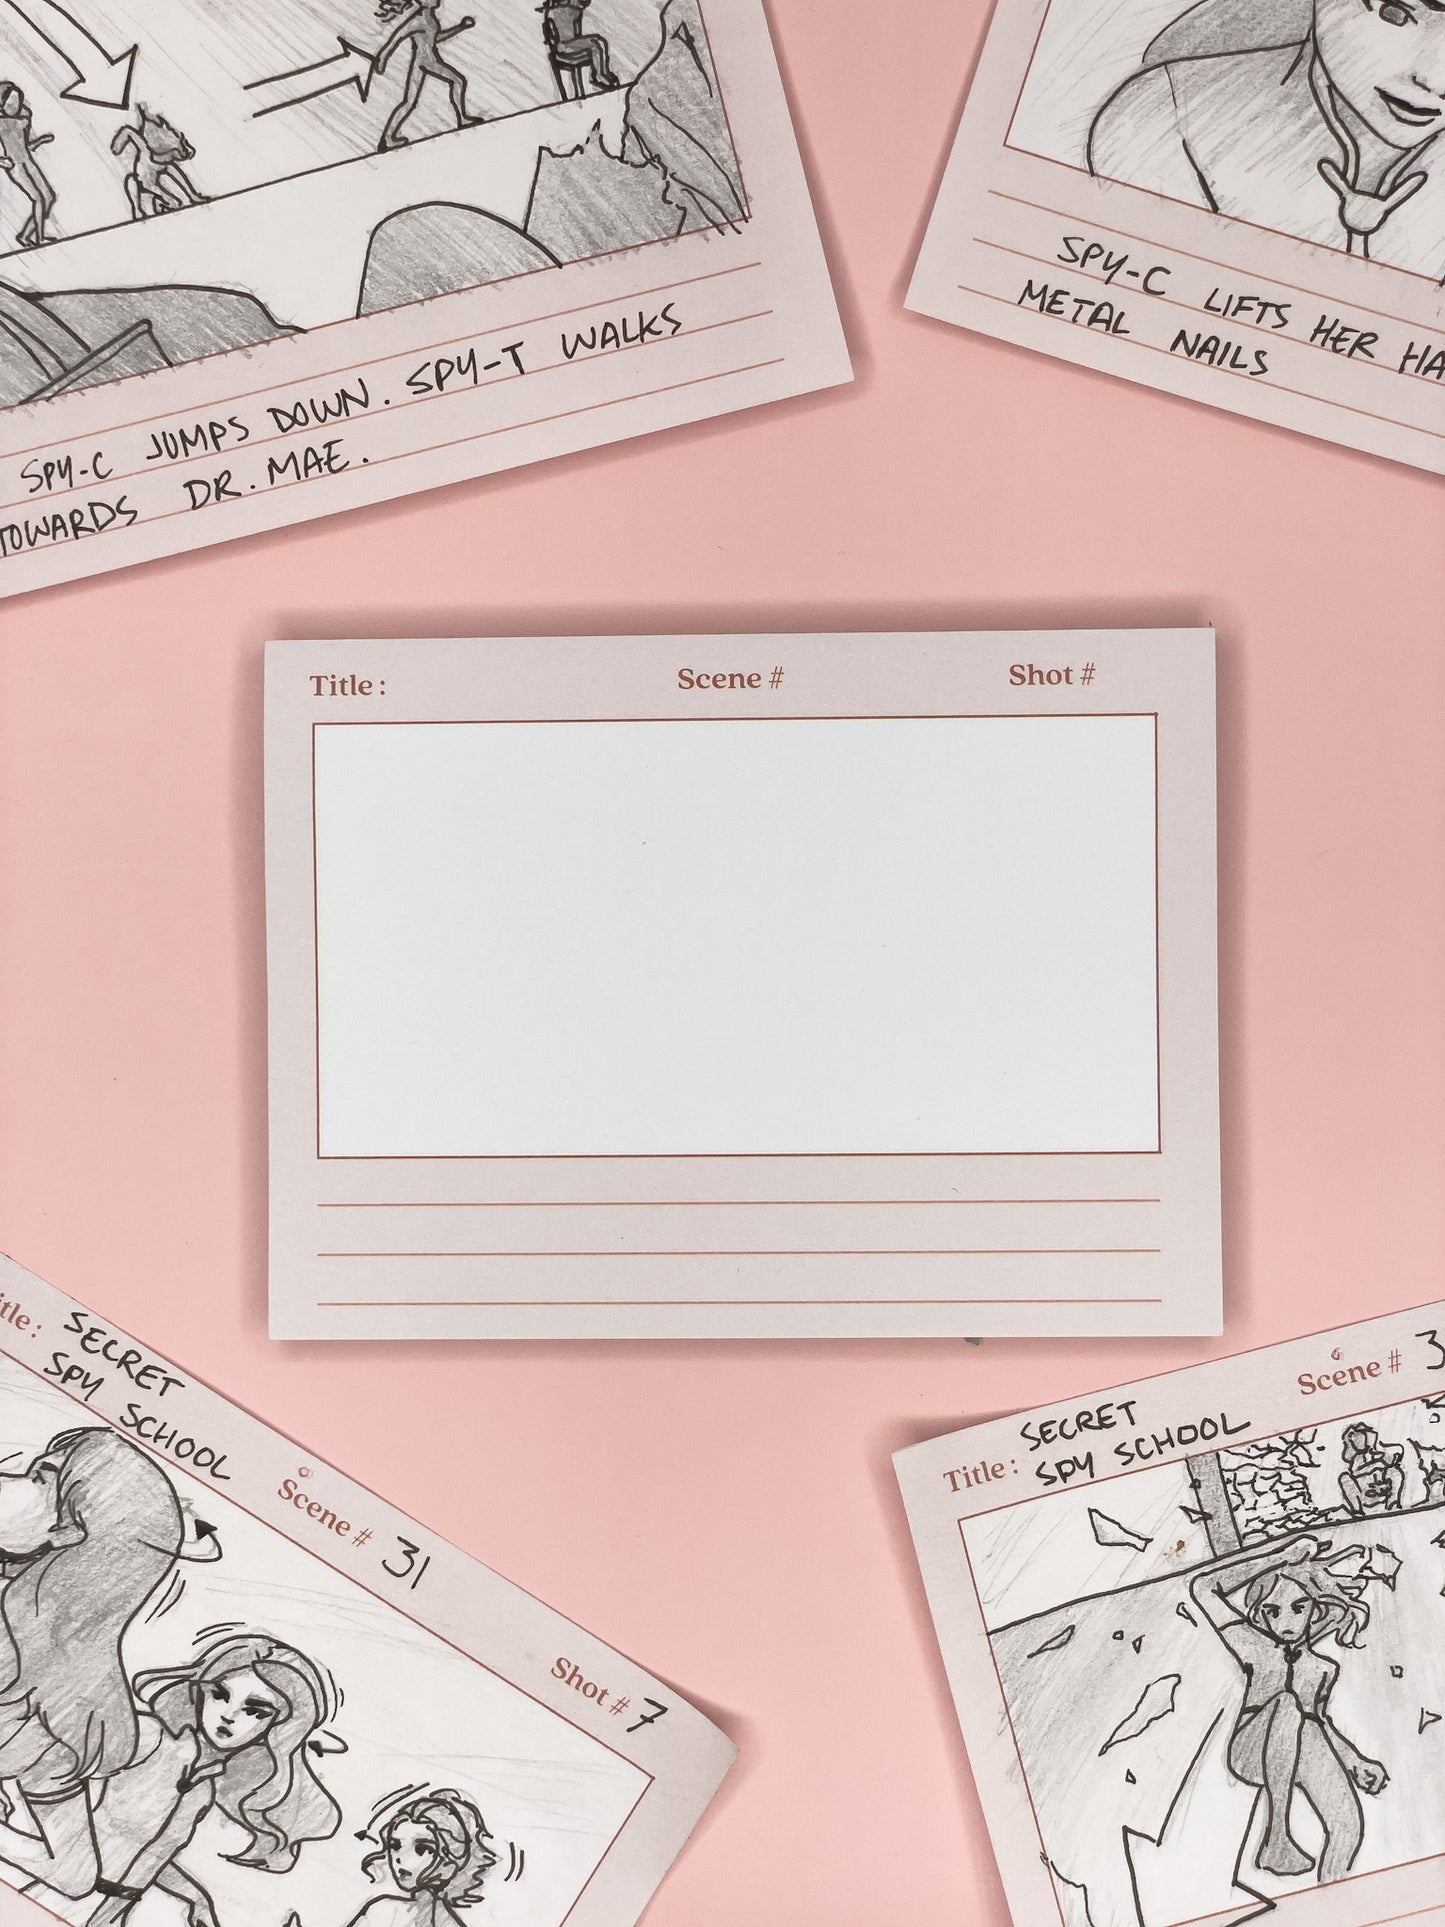 Animation student's must-have storyboard sticky note for bringing their characters and worlds to life. High-quality paper and user-friendly layout perfect for sketching, visualizing shots and creating storyboards. Durable cover, compact size, and easy to take on the go